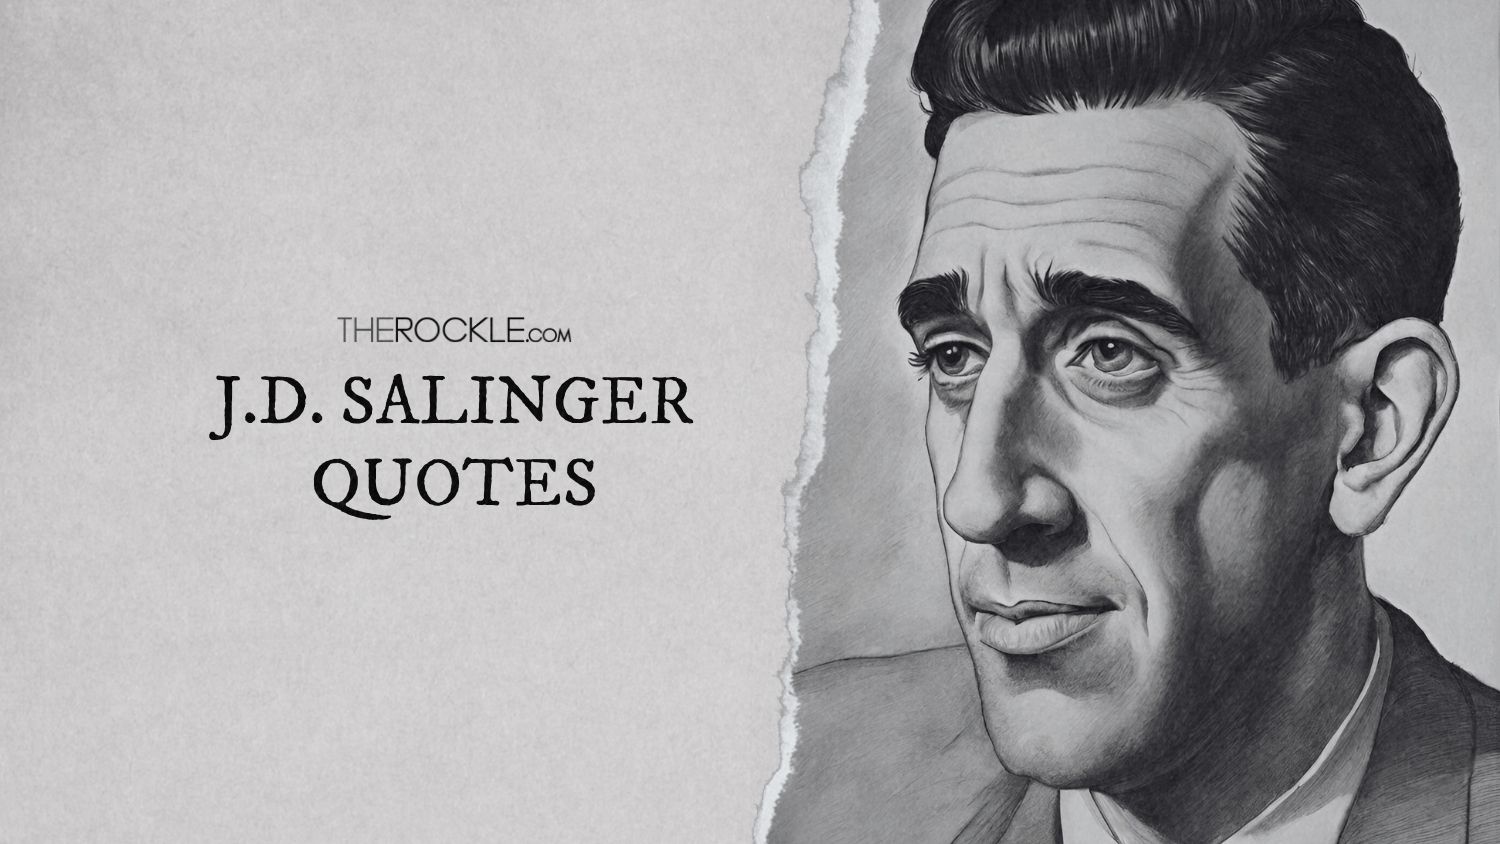 10 J.D. Salinger Quotes That’ll Make You Want to Reread His Classics